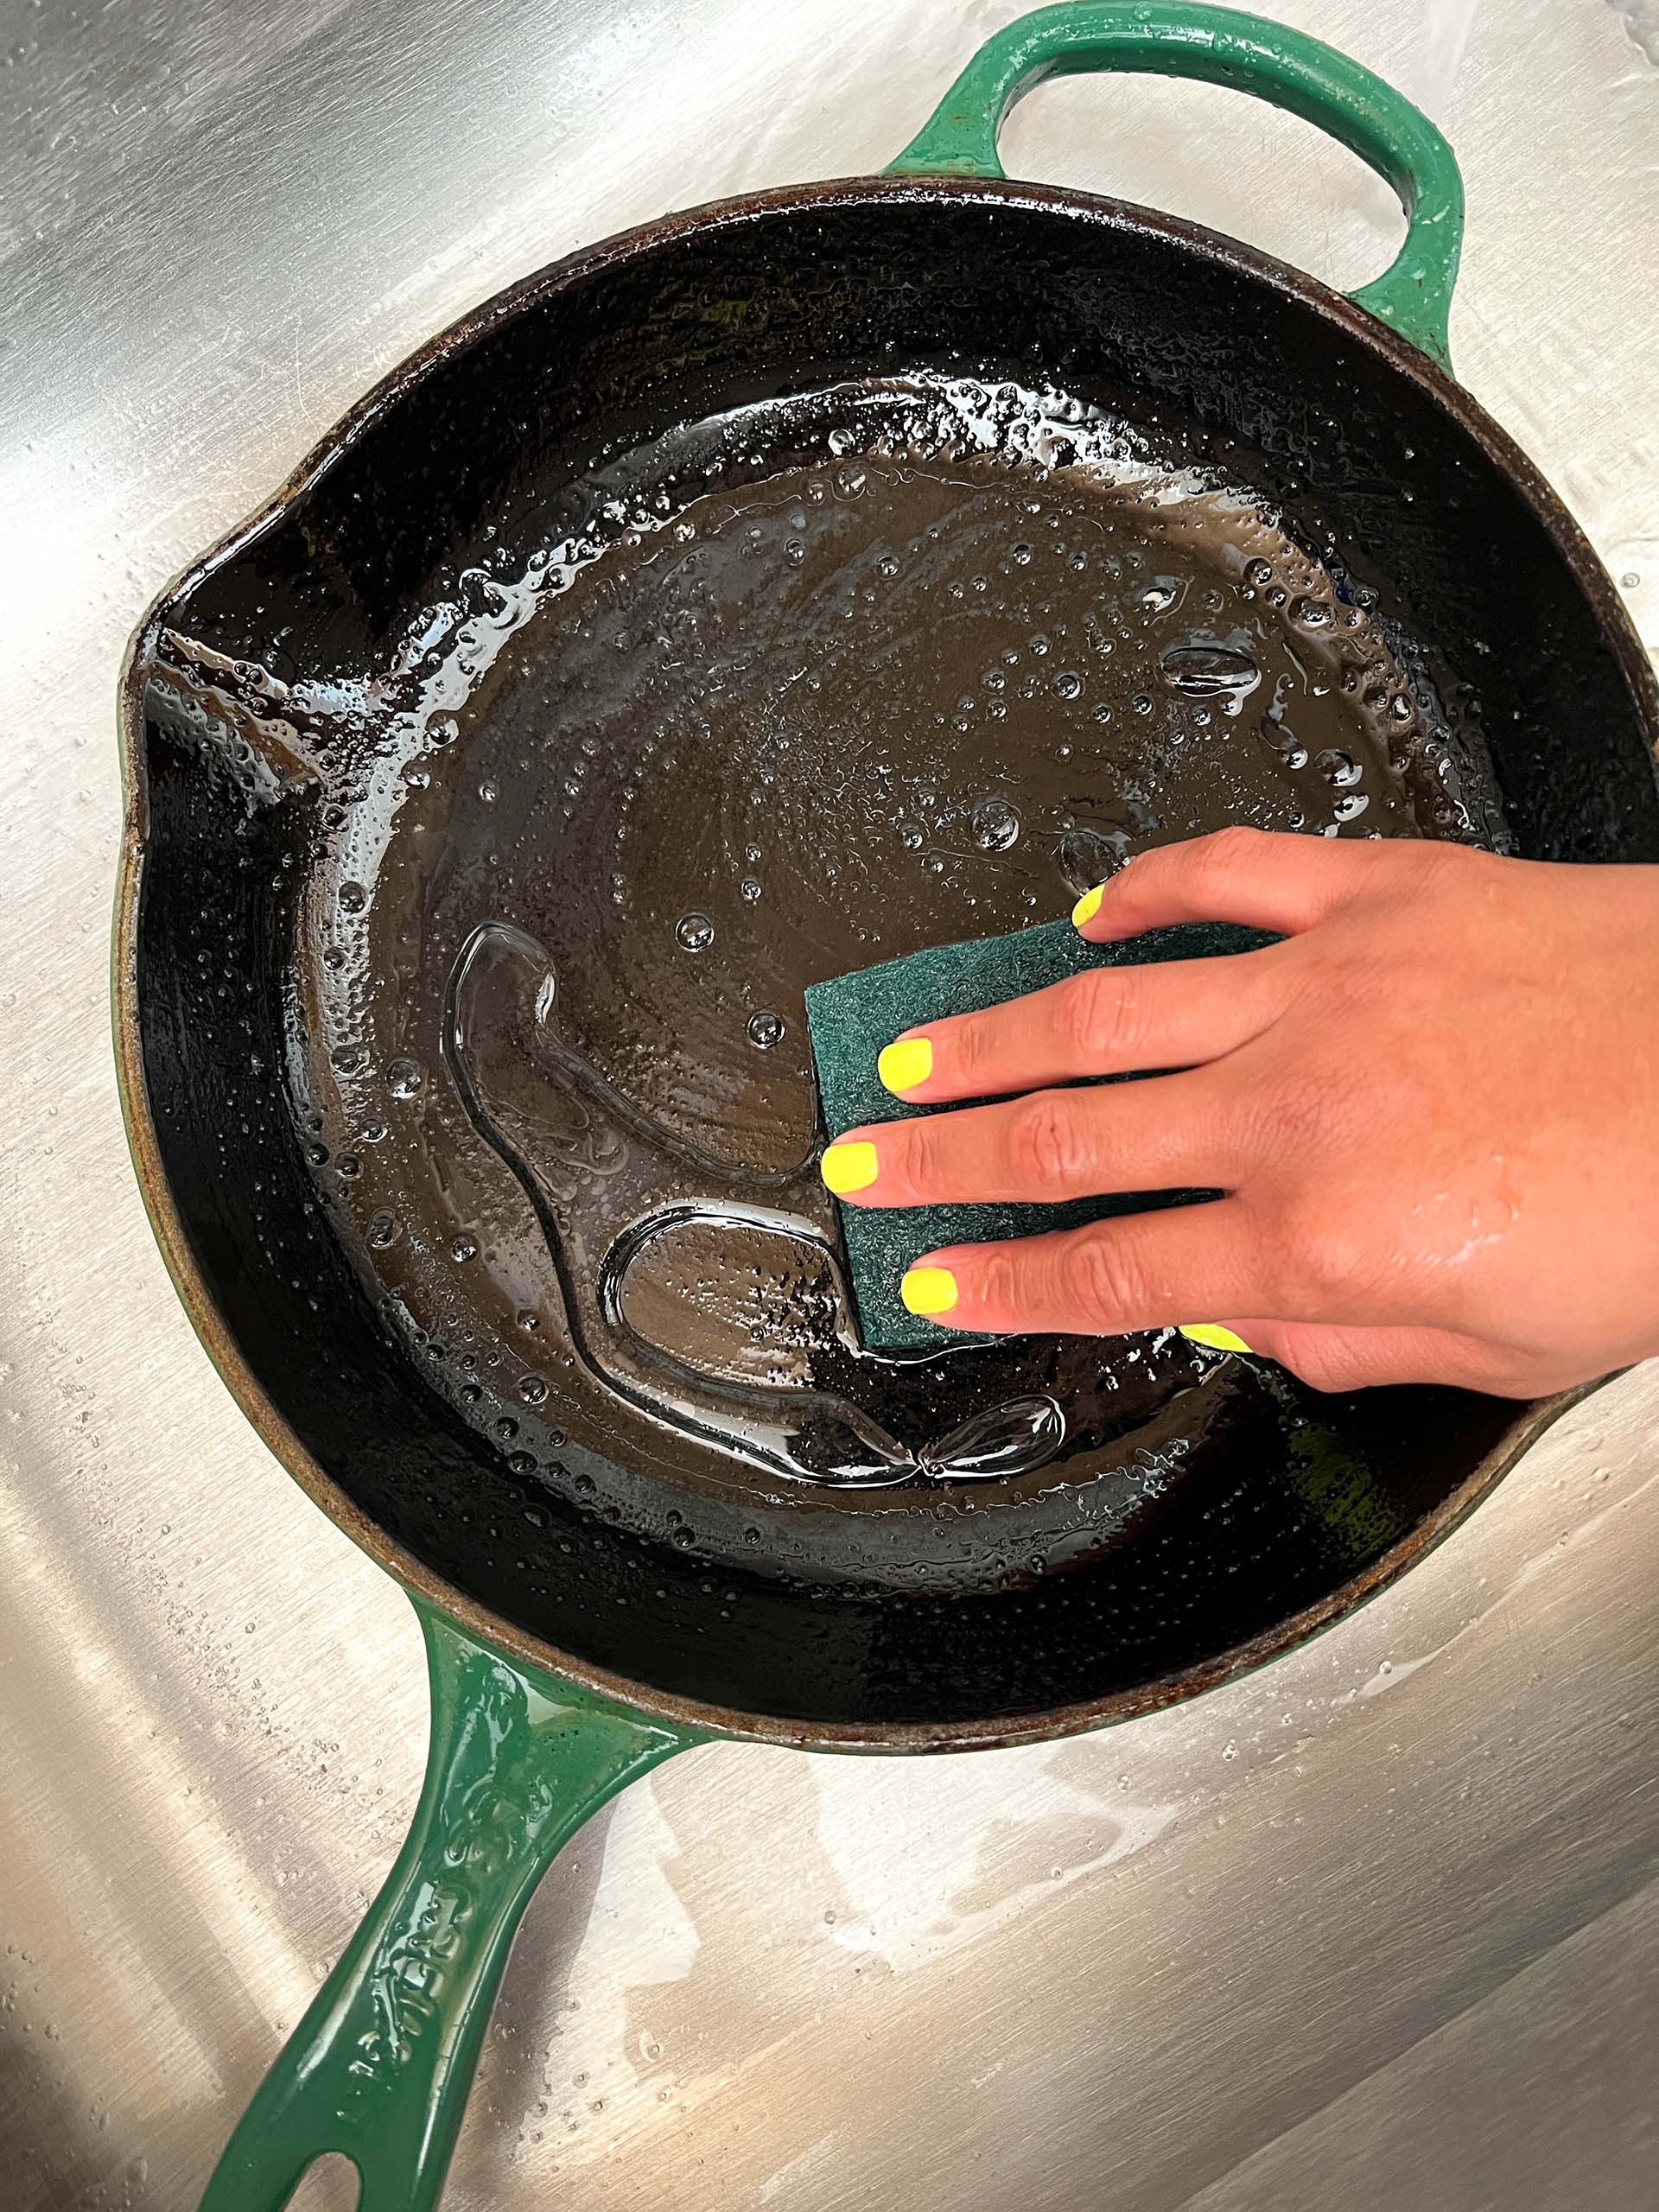 Cast iron skillet in the sink being washed.